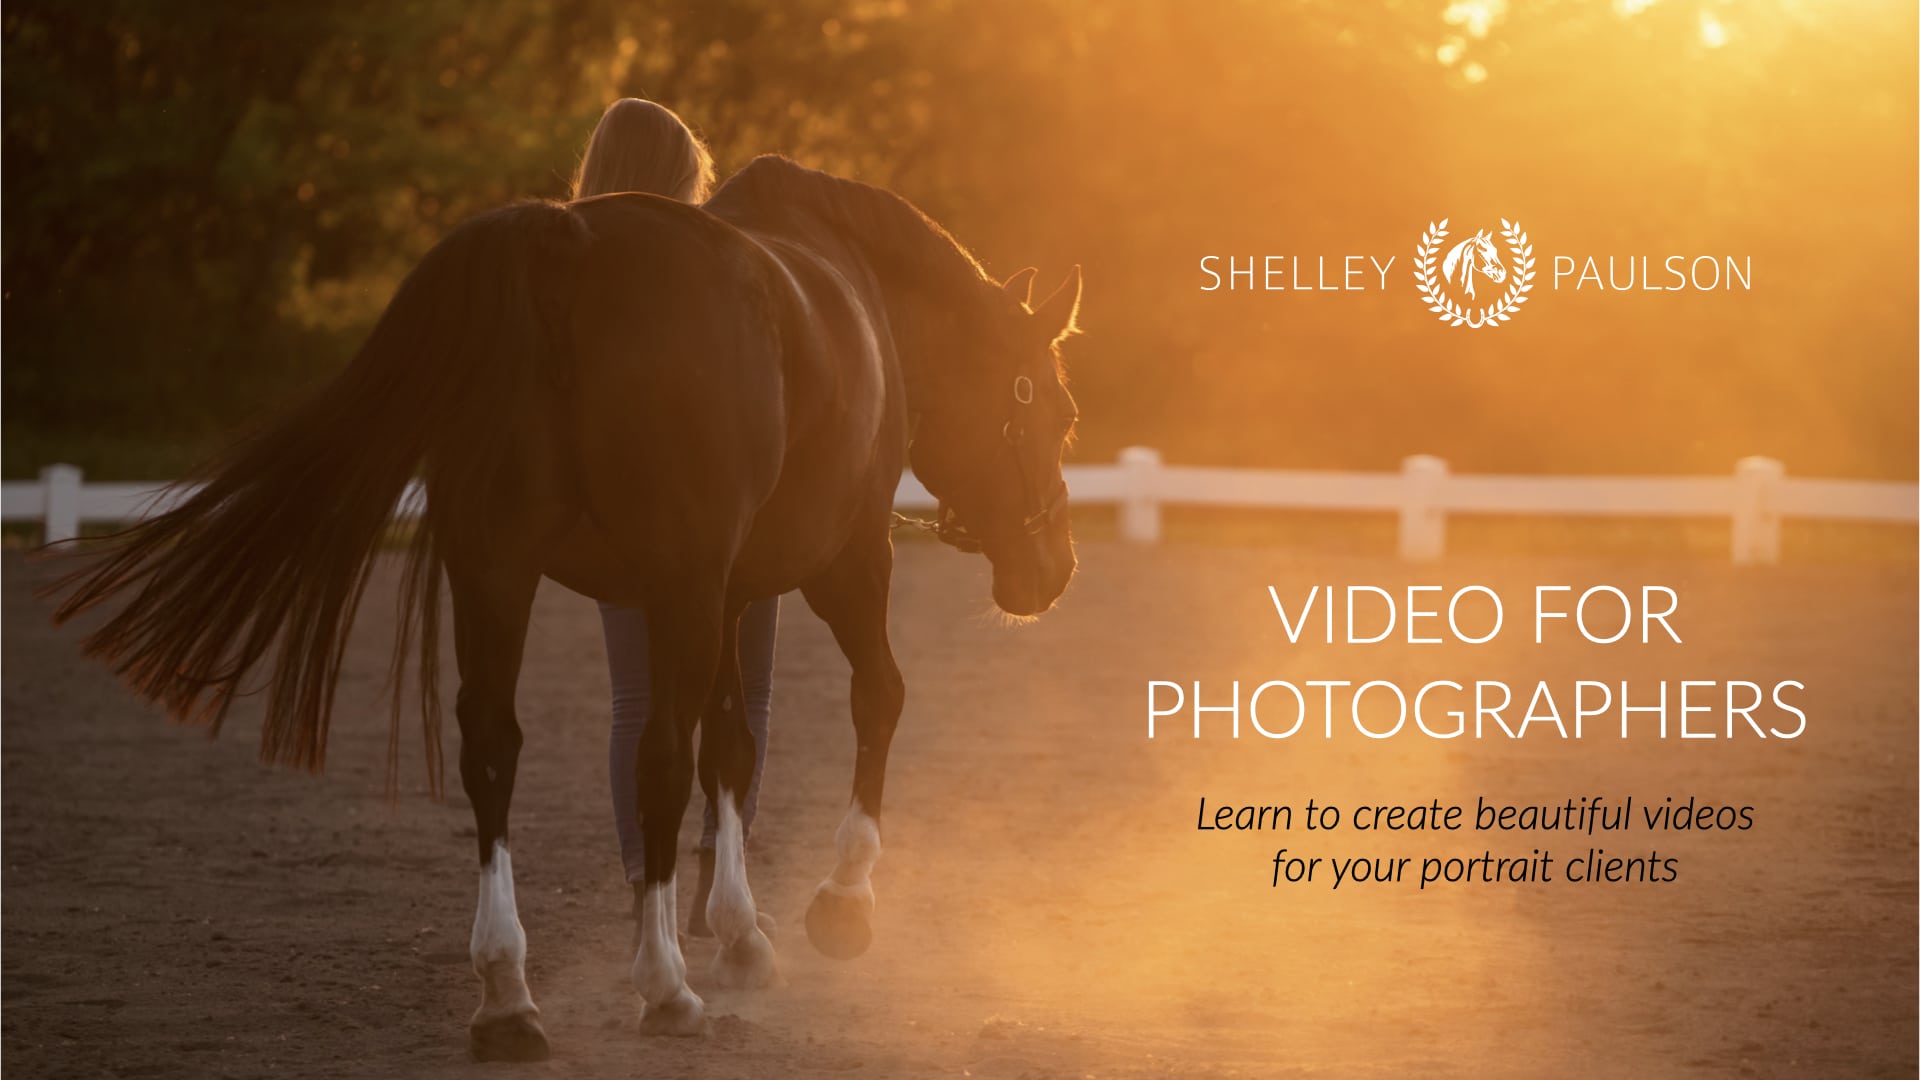 New Course: Video for Photographers